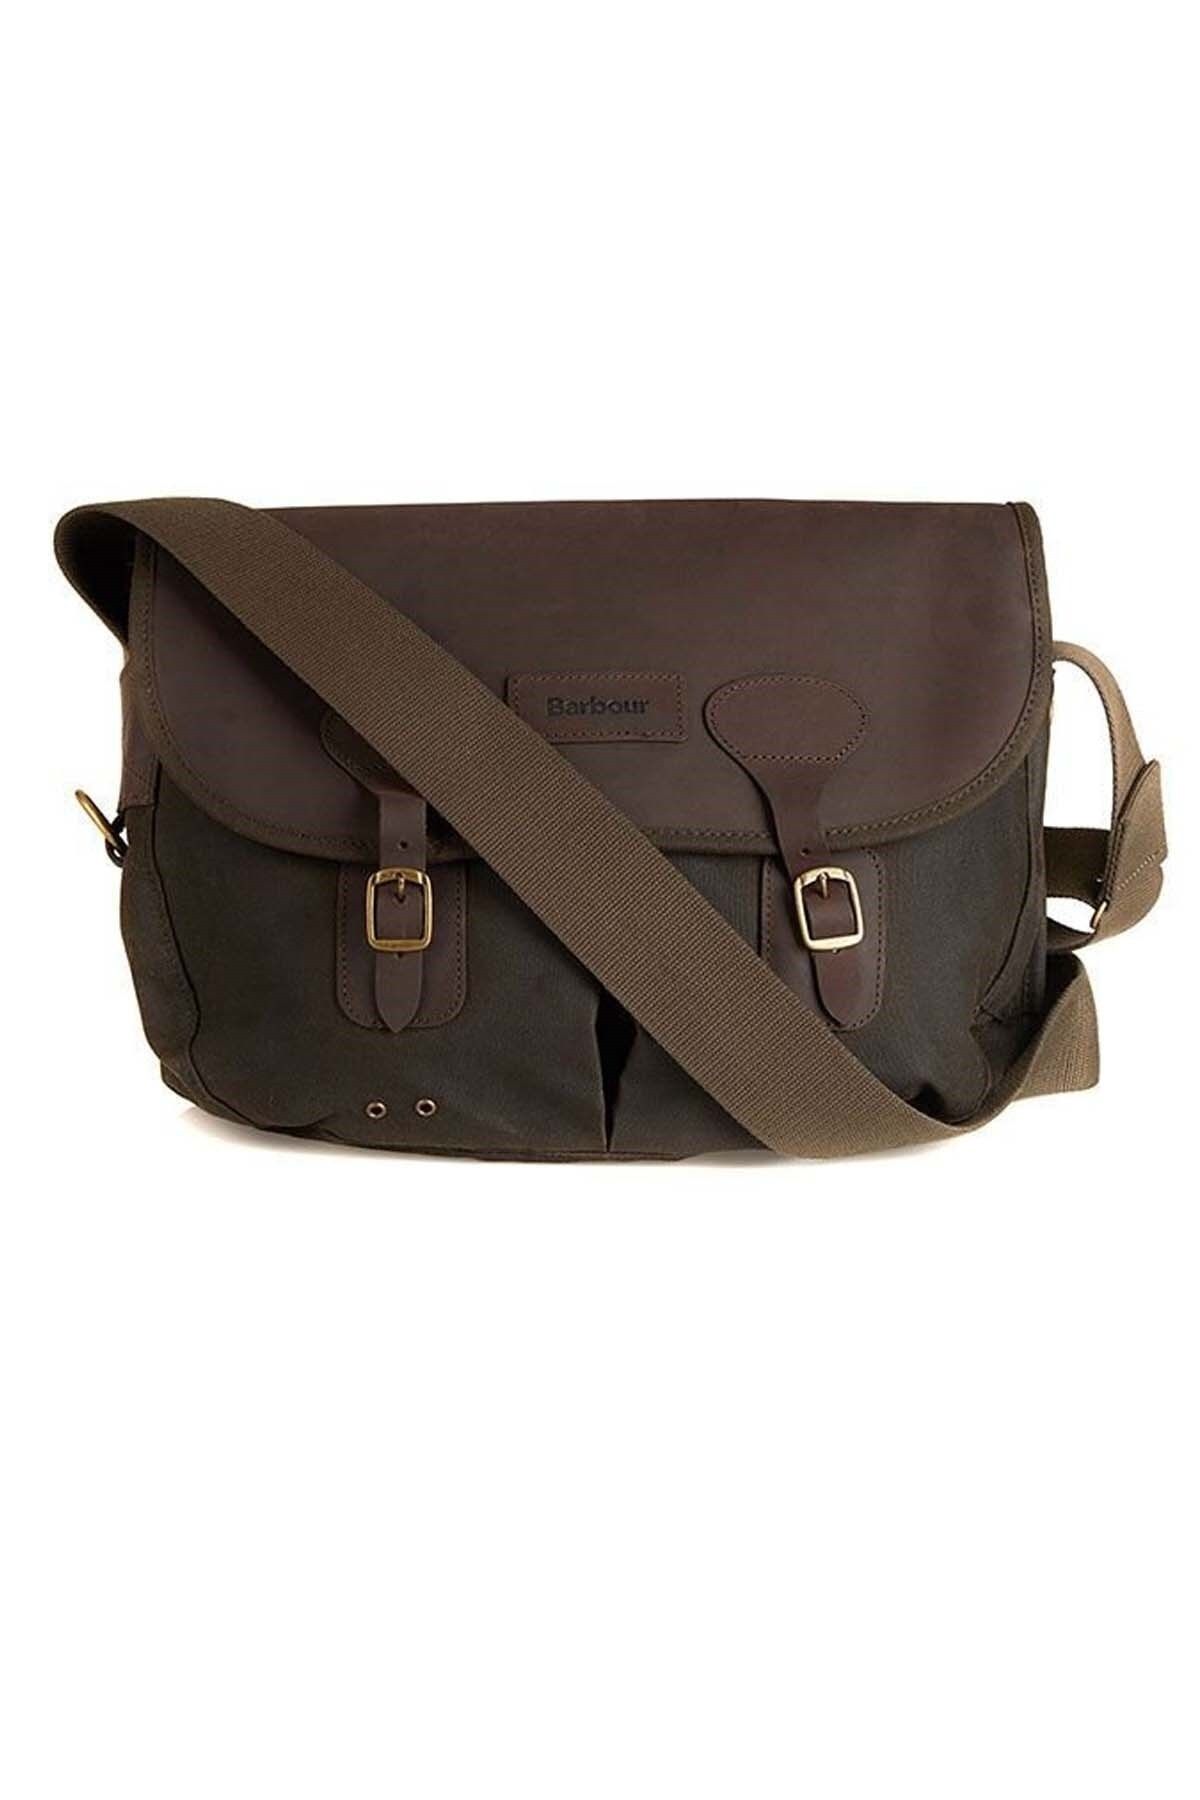 Barbour Wax Leather Tarras Bag Olive